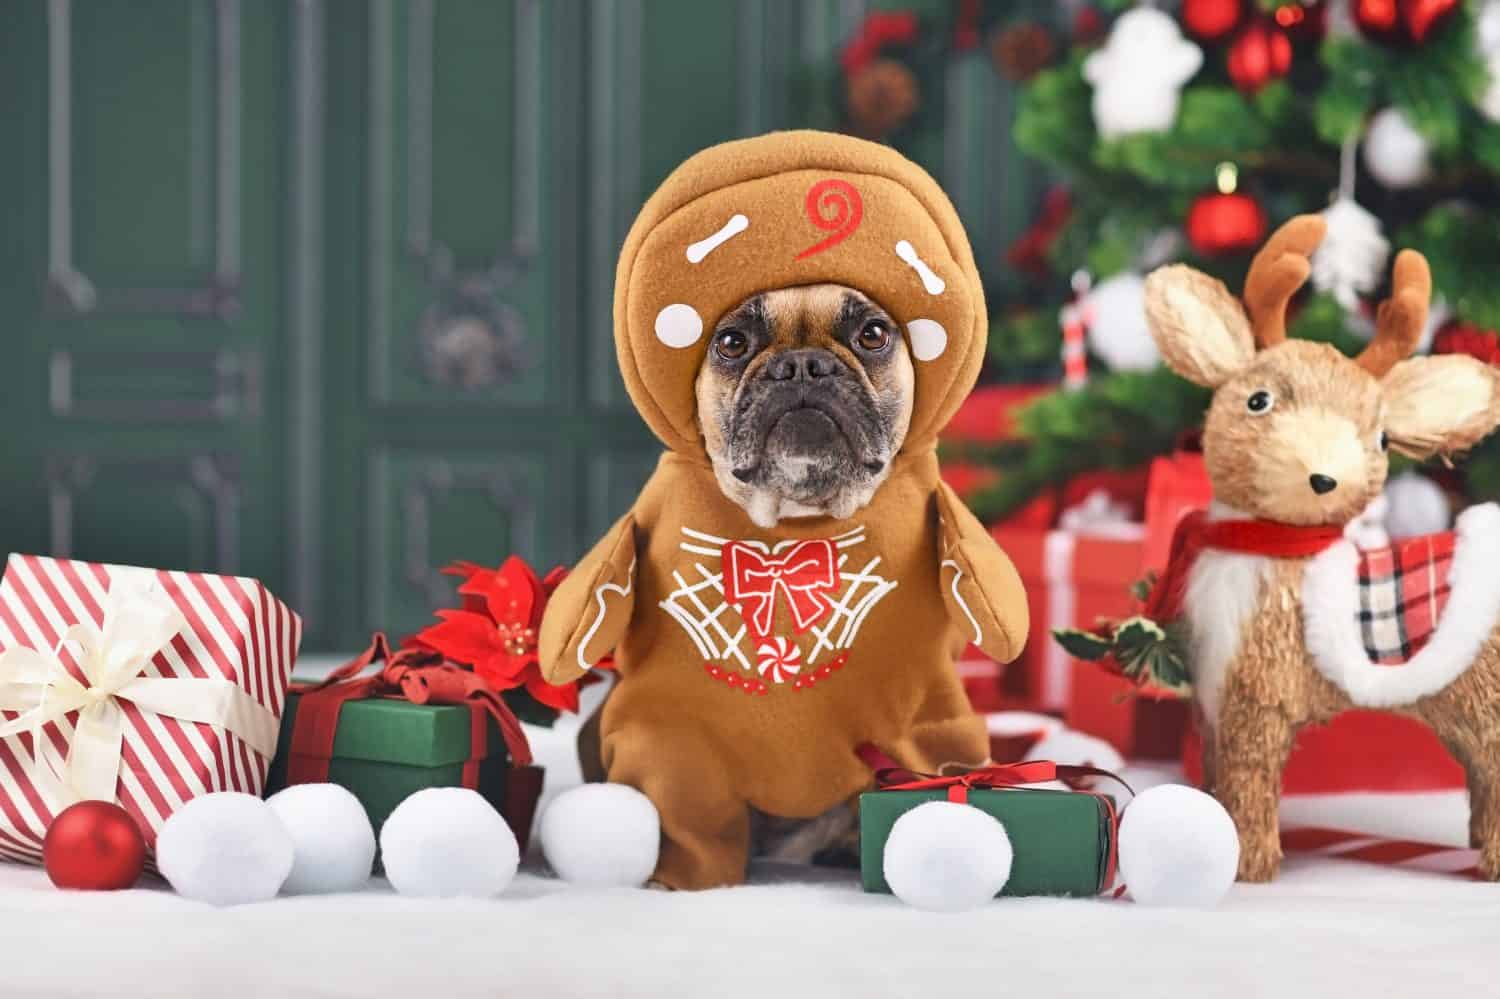 Funny dog Christmas costume. French Bulldog wearing gingerbread outfit with arms surrounded by festive decoration